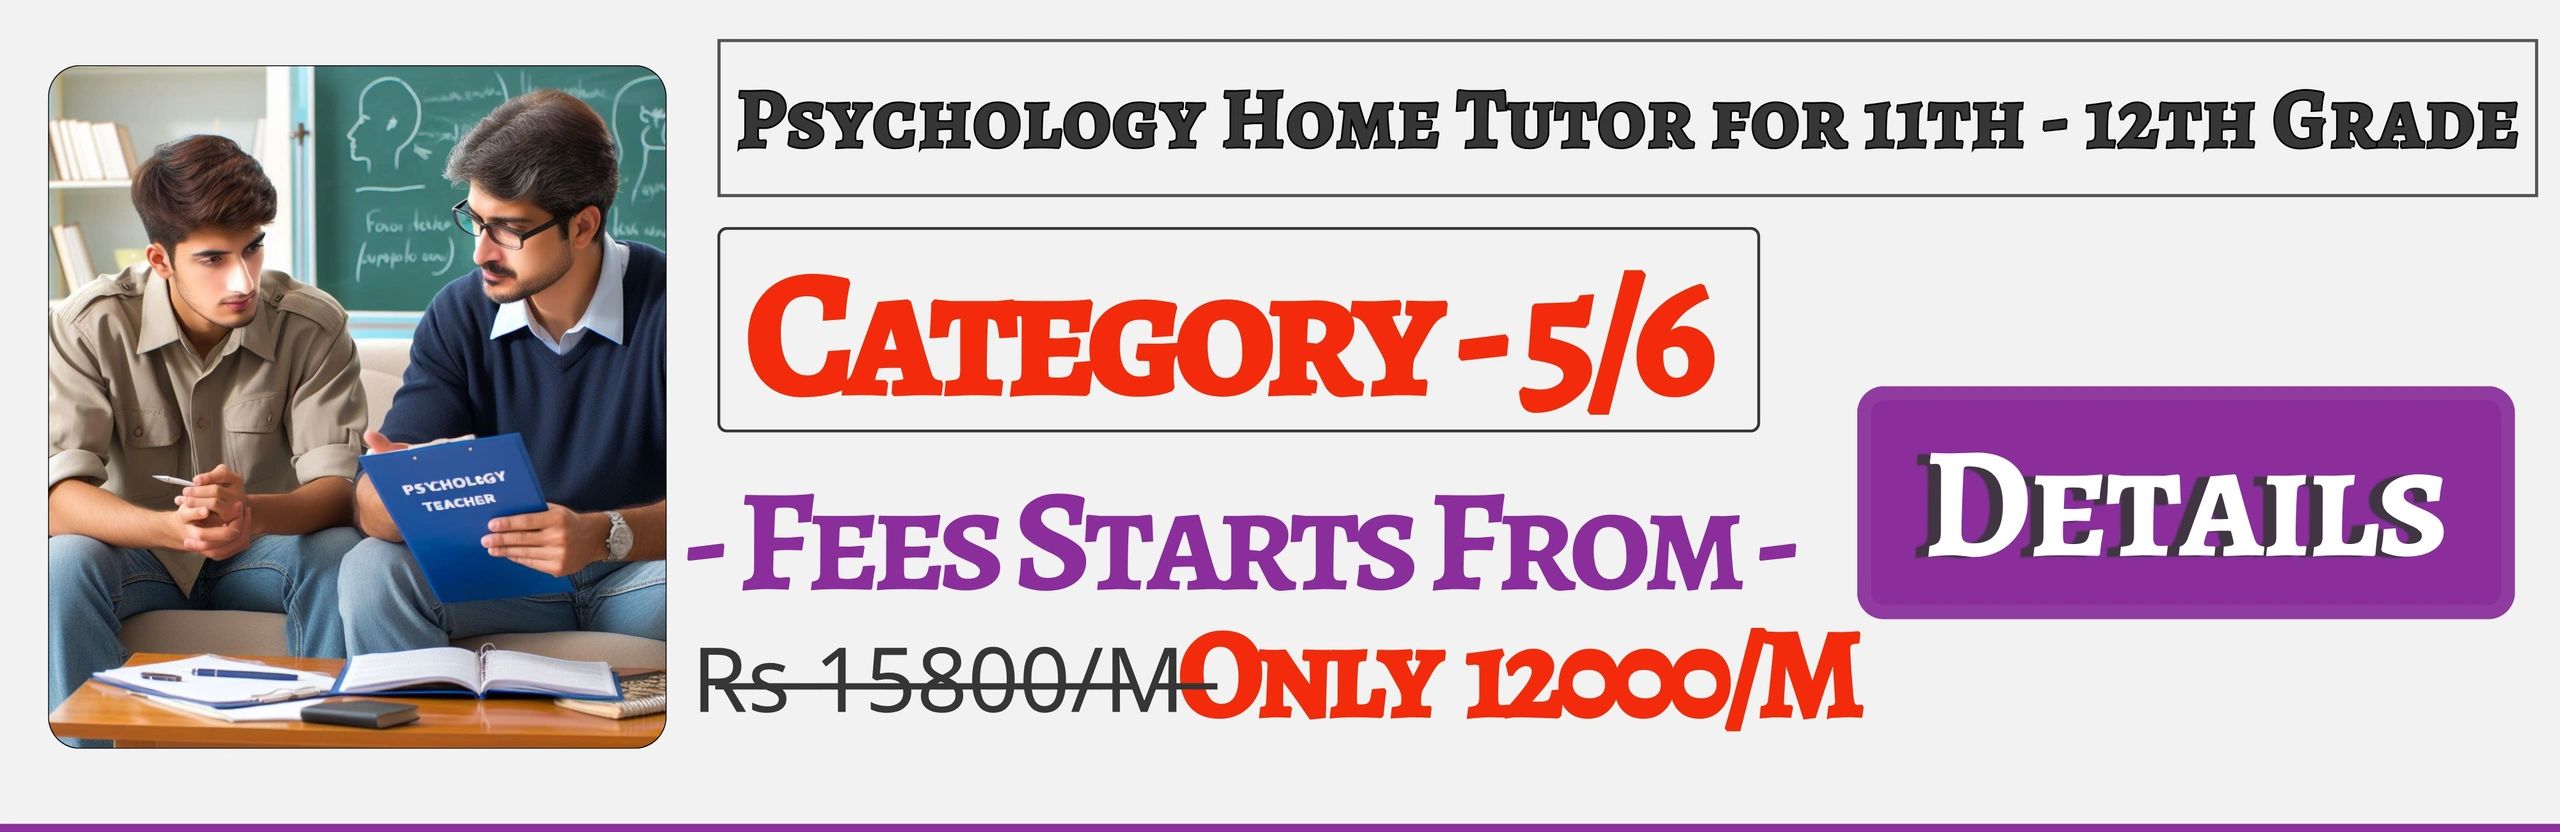 Book Best Nearby Psychology Home Tuition Tutors For 11th & 12th In Jaipur , Fees Only 12000/M